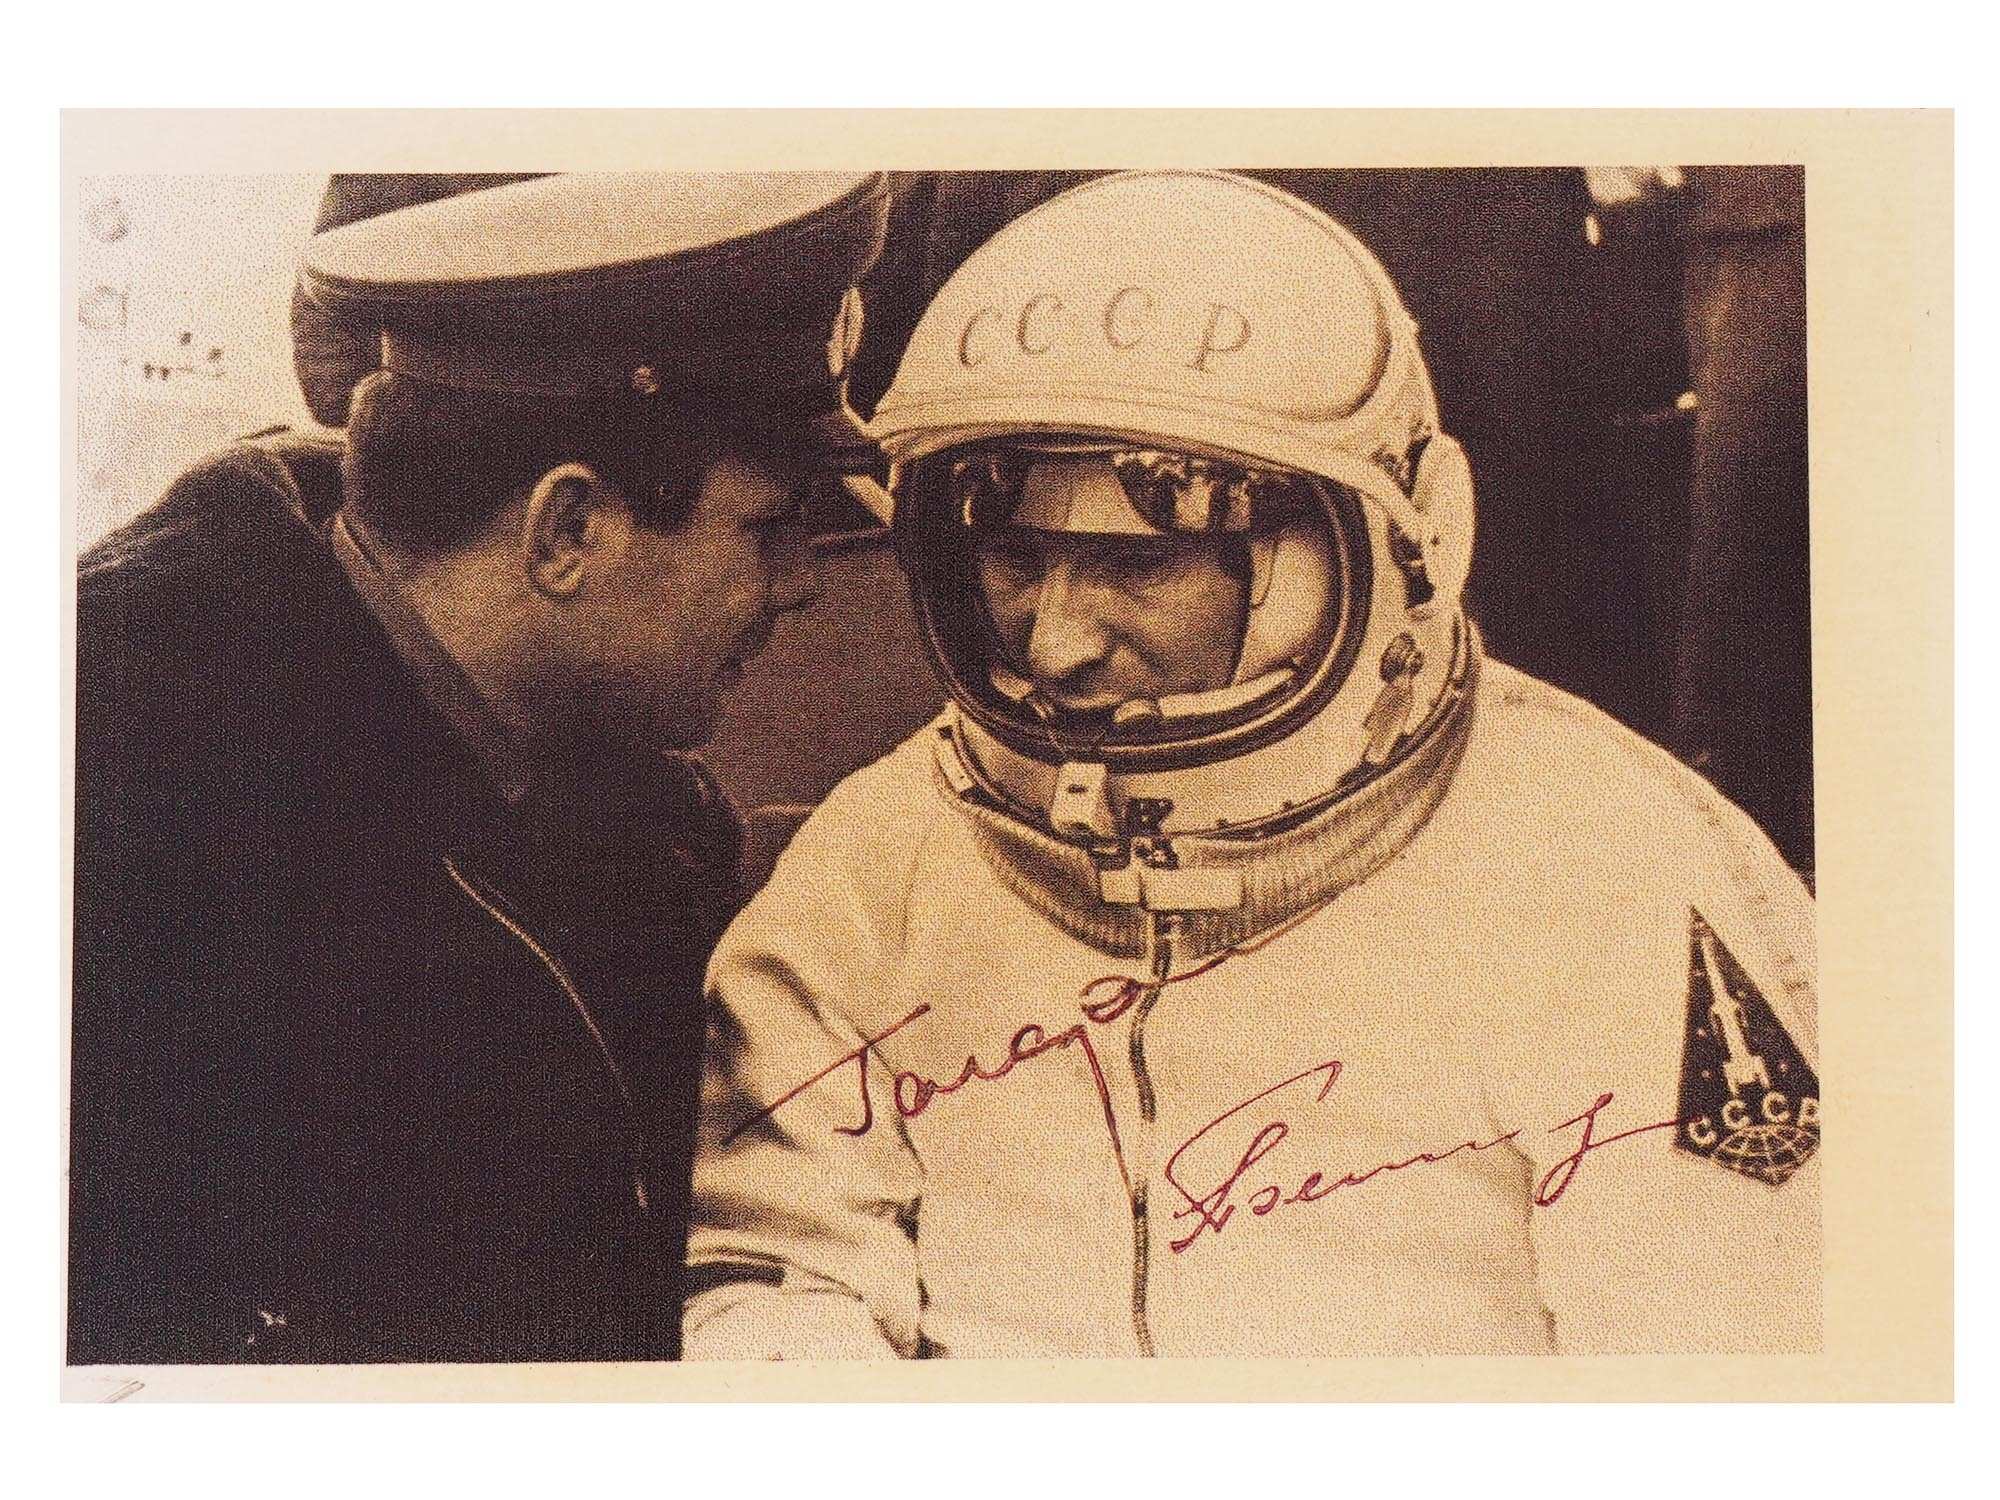 SOVIET PHOTO AUTOGRAPHED BY GAGARIN AND BELYAYEV